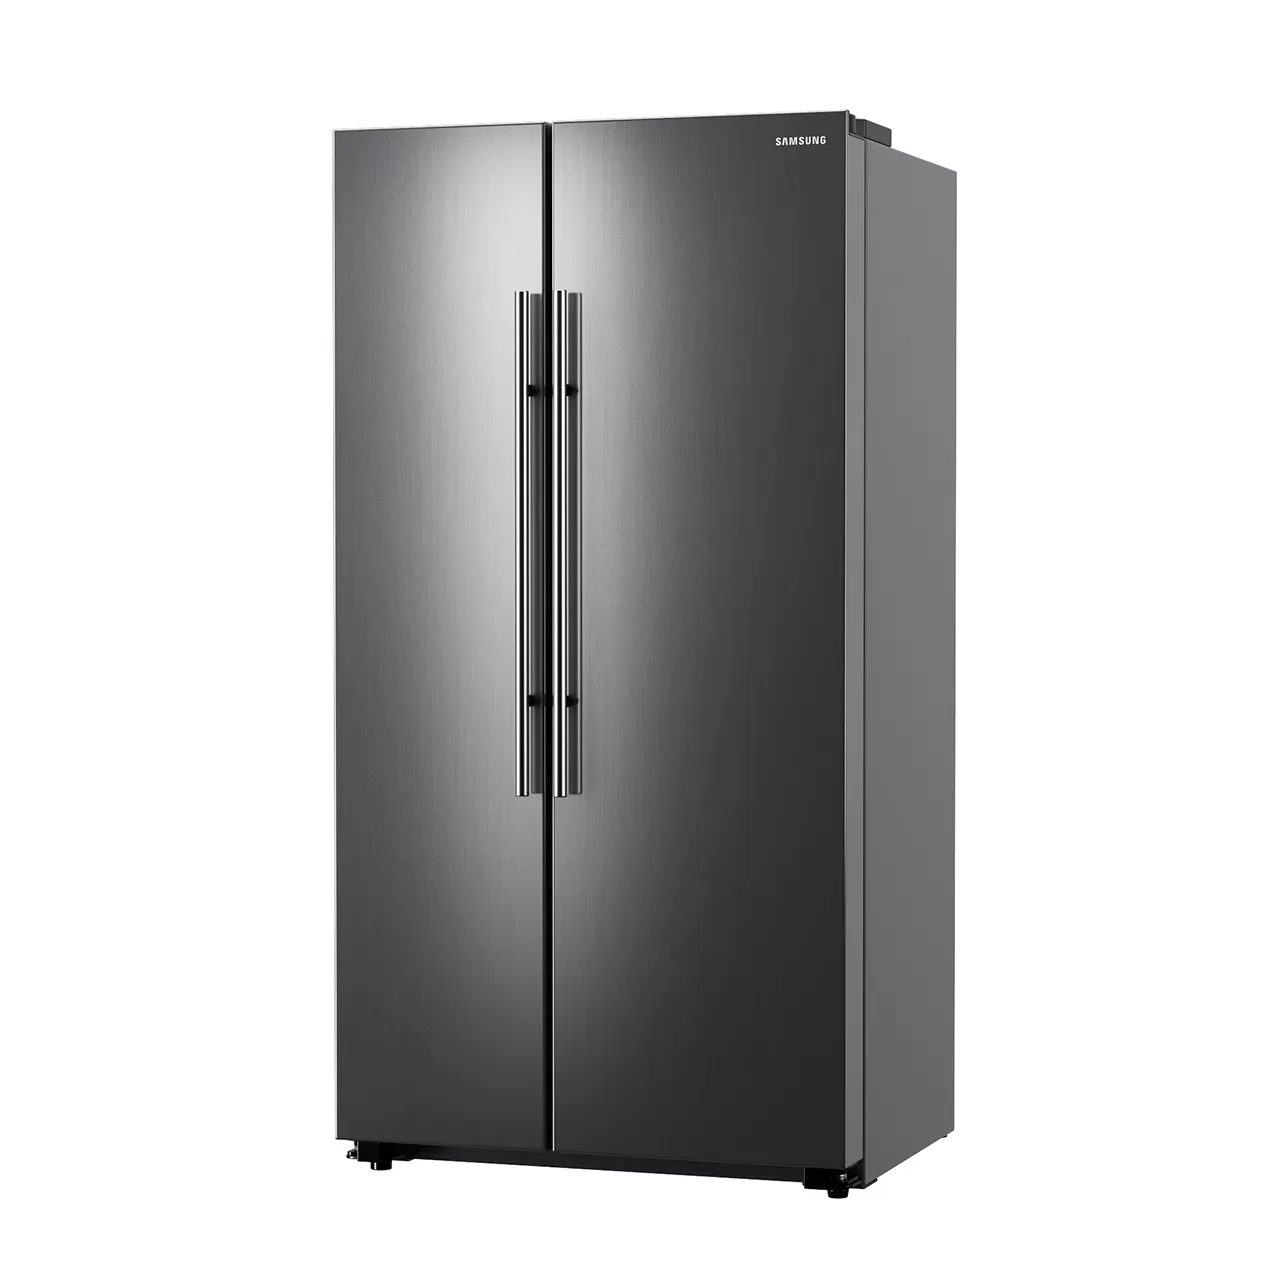 Kitchen – rs8000-side-by-side-fridge-freezer-rs6kn-by-samsung